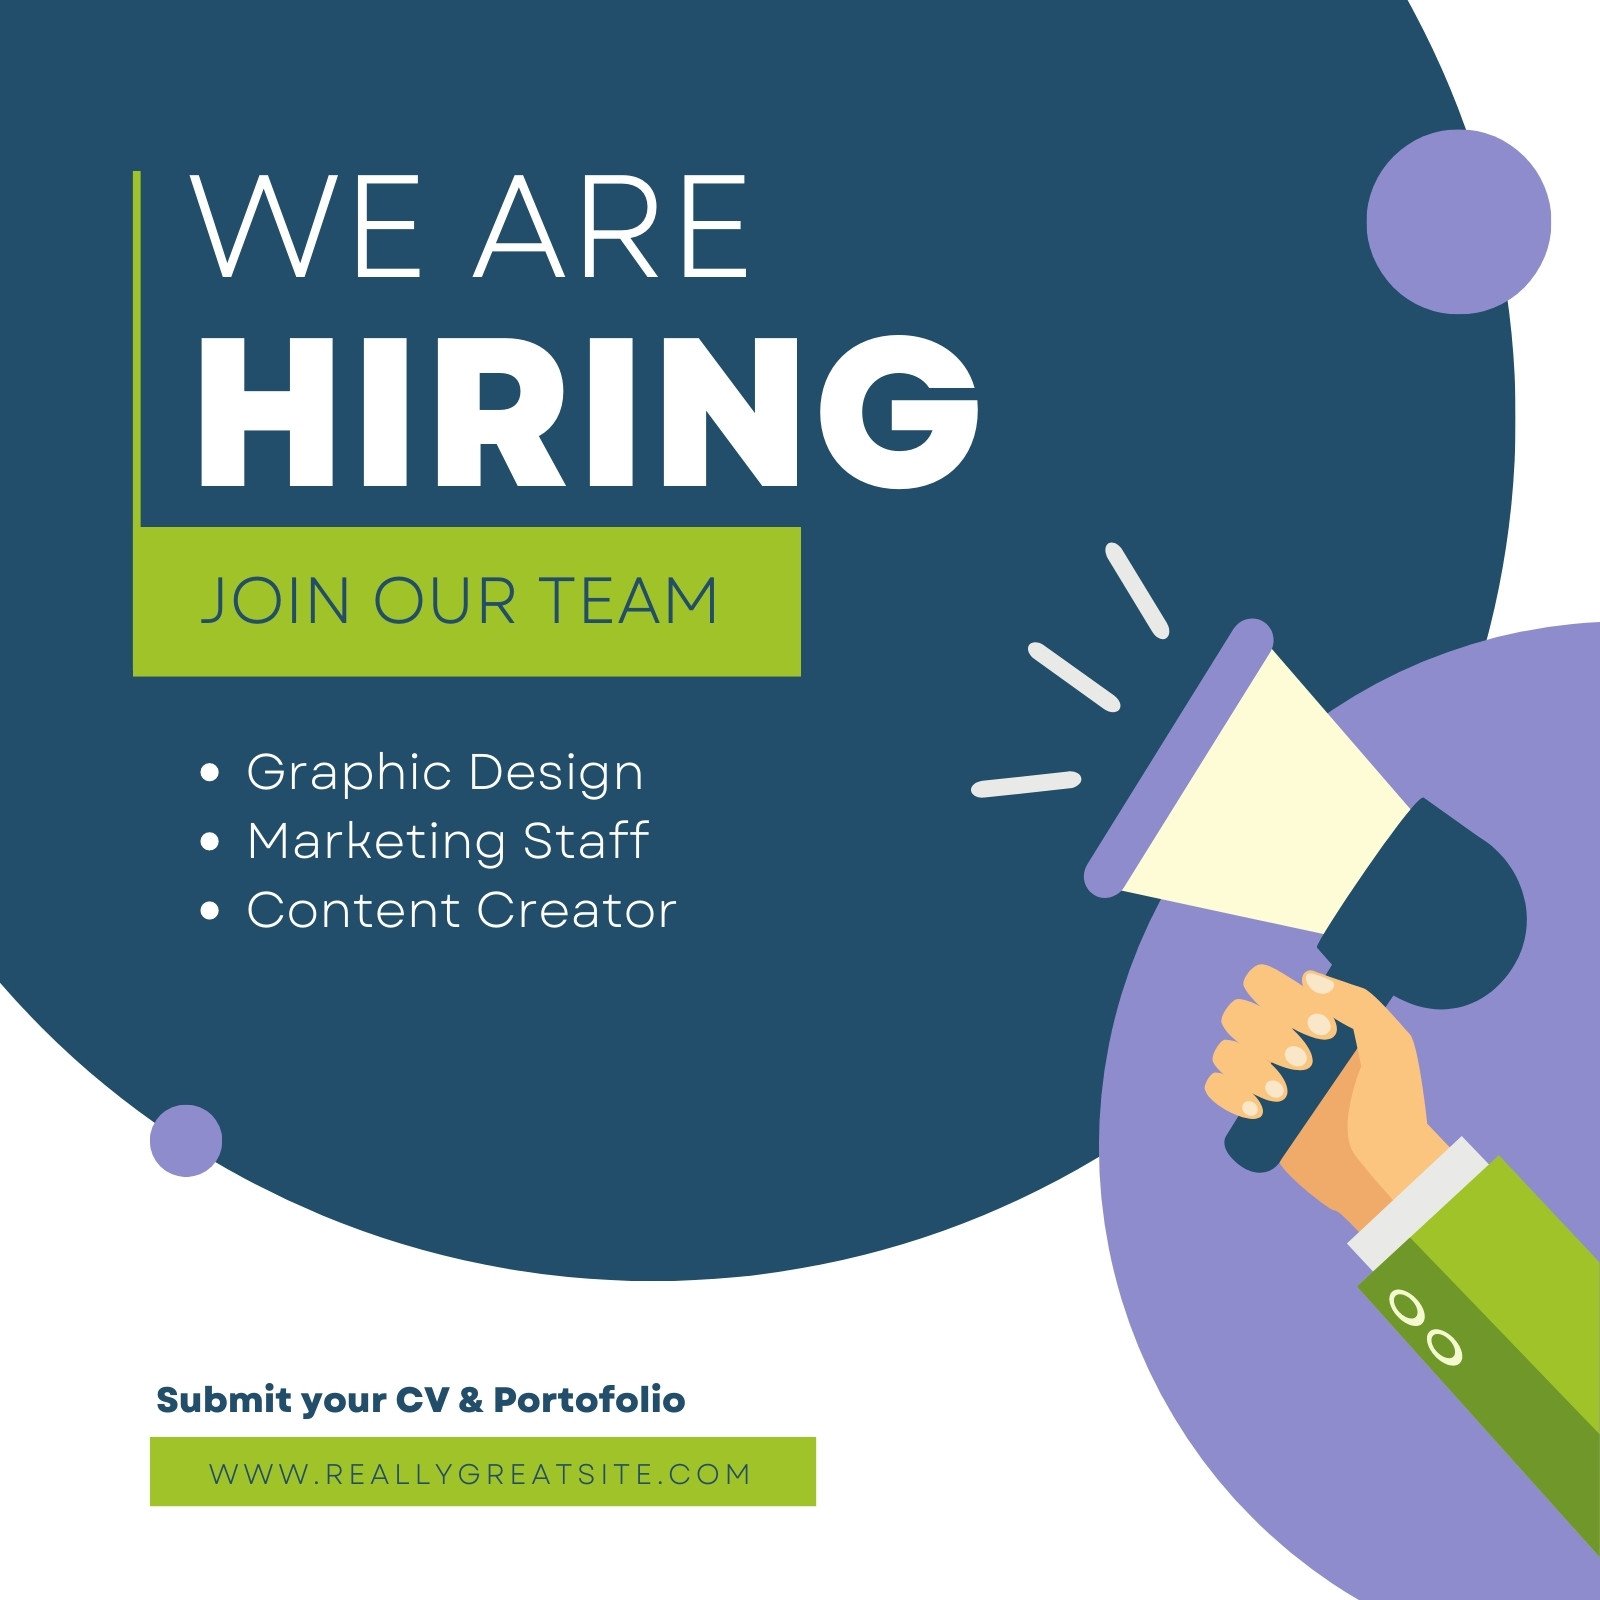 We Are Hiring Poster Template Free Download - Printable Templates